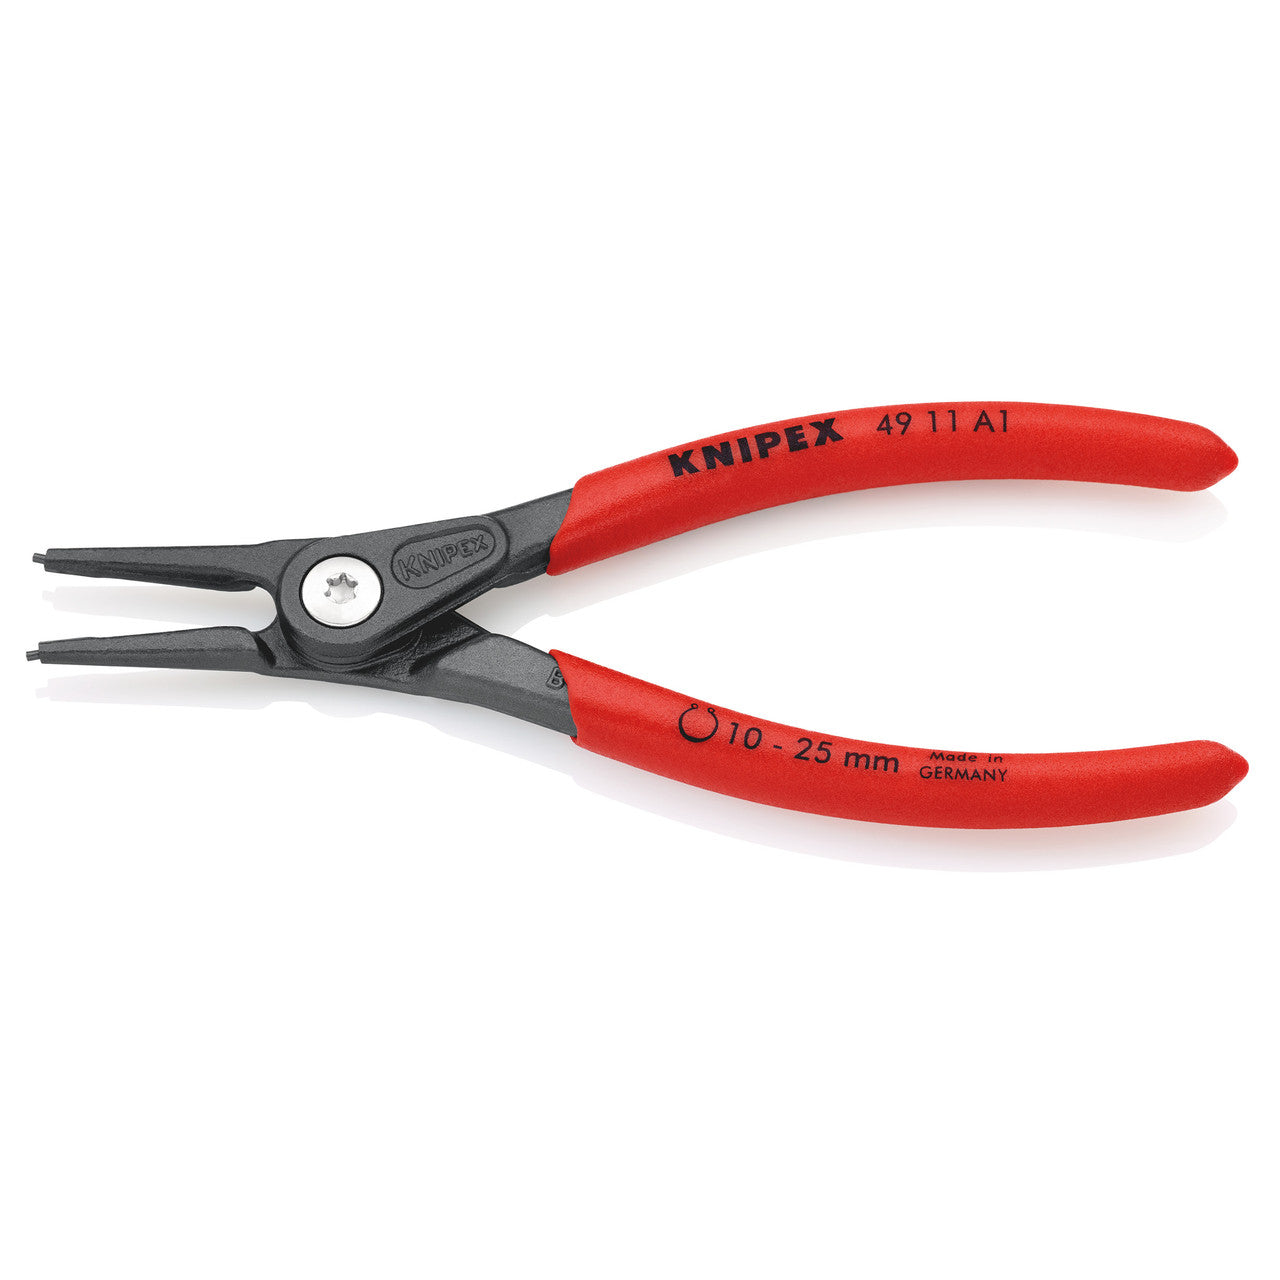 Knipex 001957 Precision Circlip Pliers Set in a Roll (4 Piece)